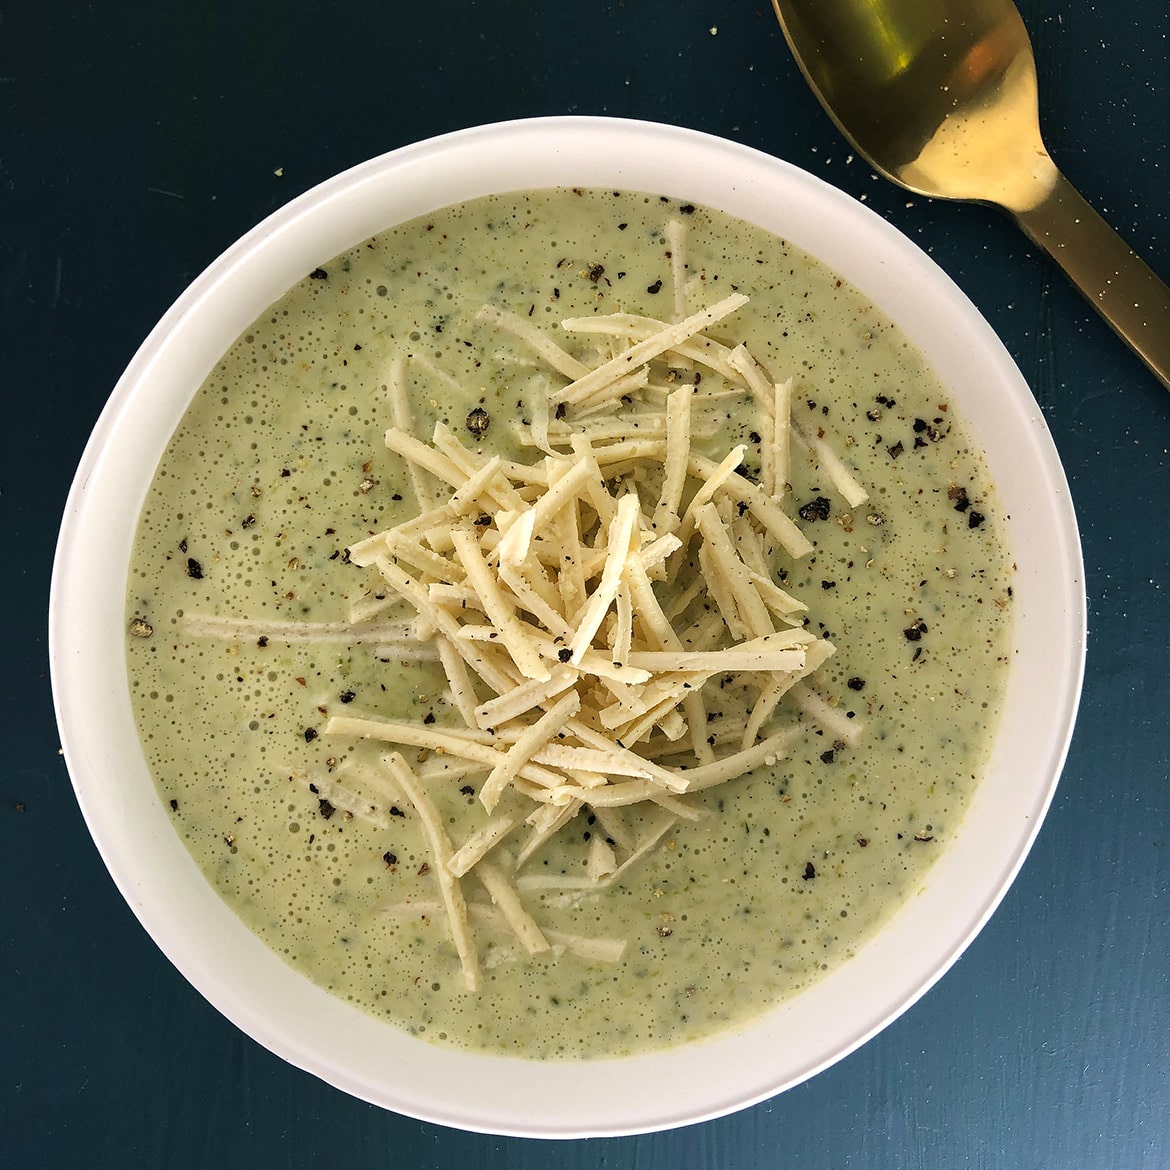 Topdown view of Vegan Broccoli Cheese Soup garnished with vegan cheese